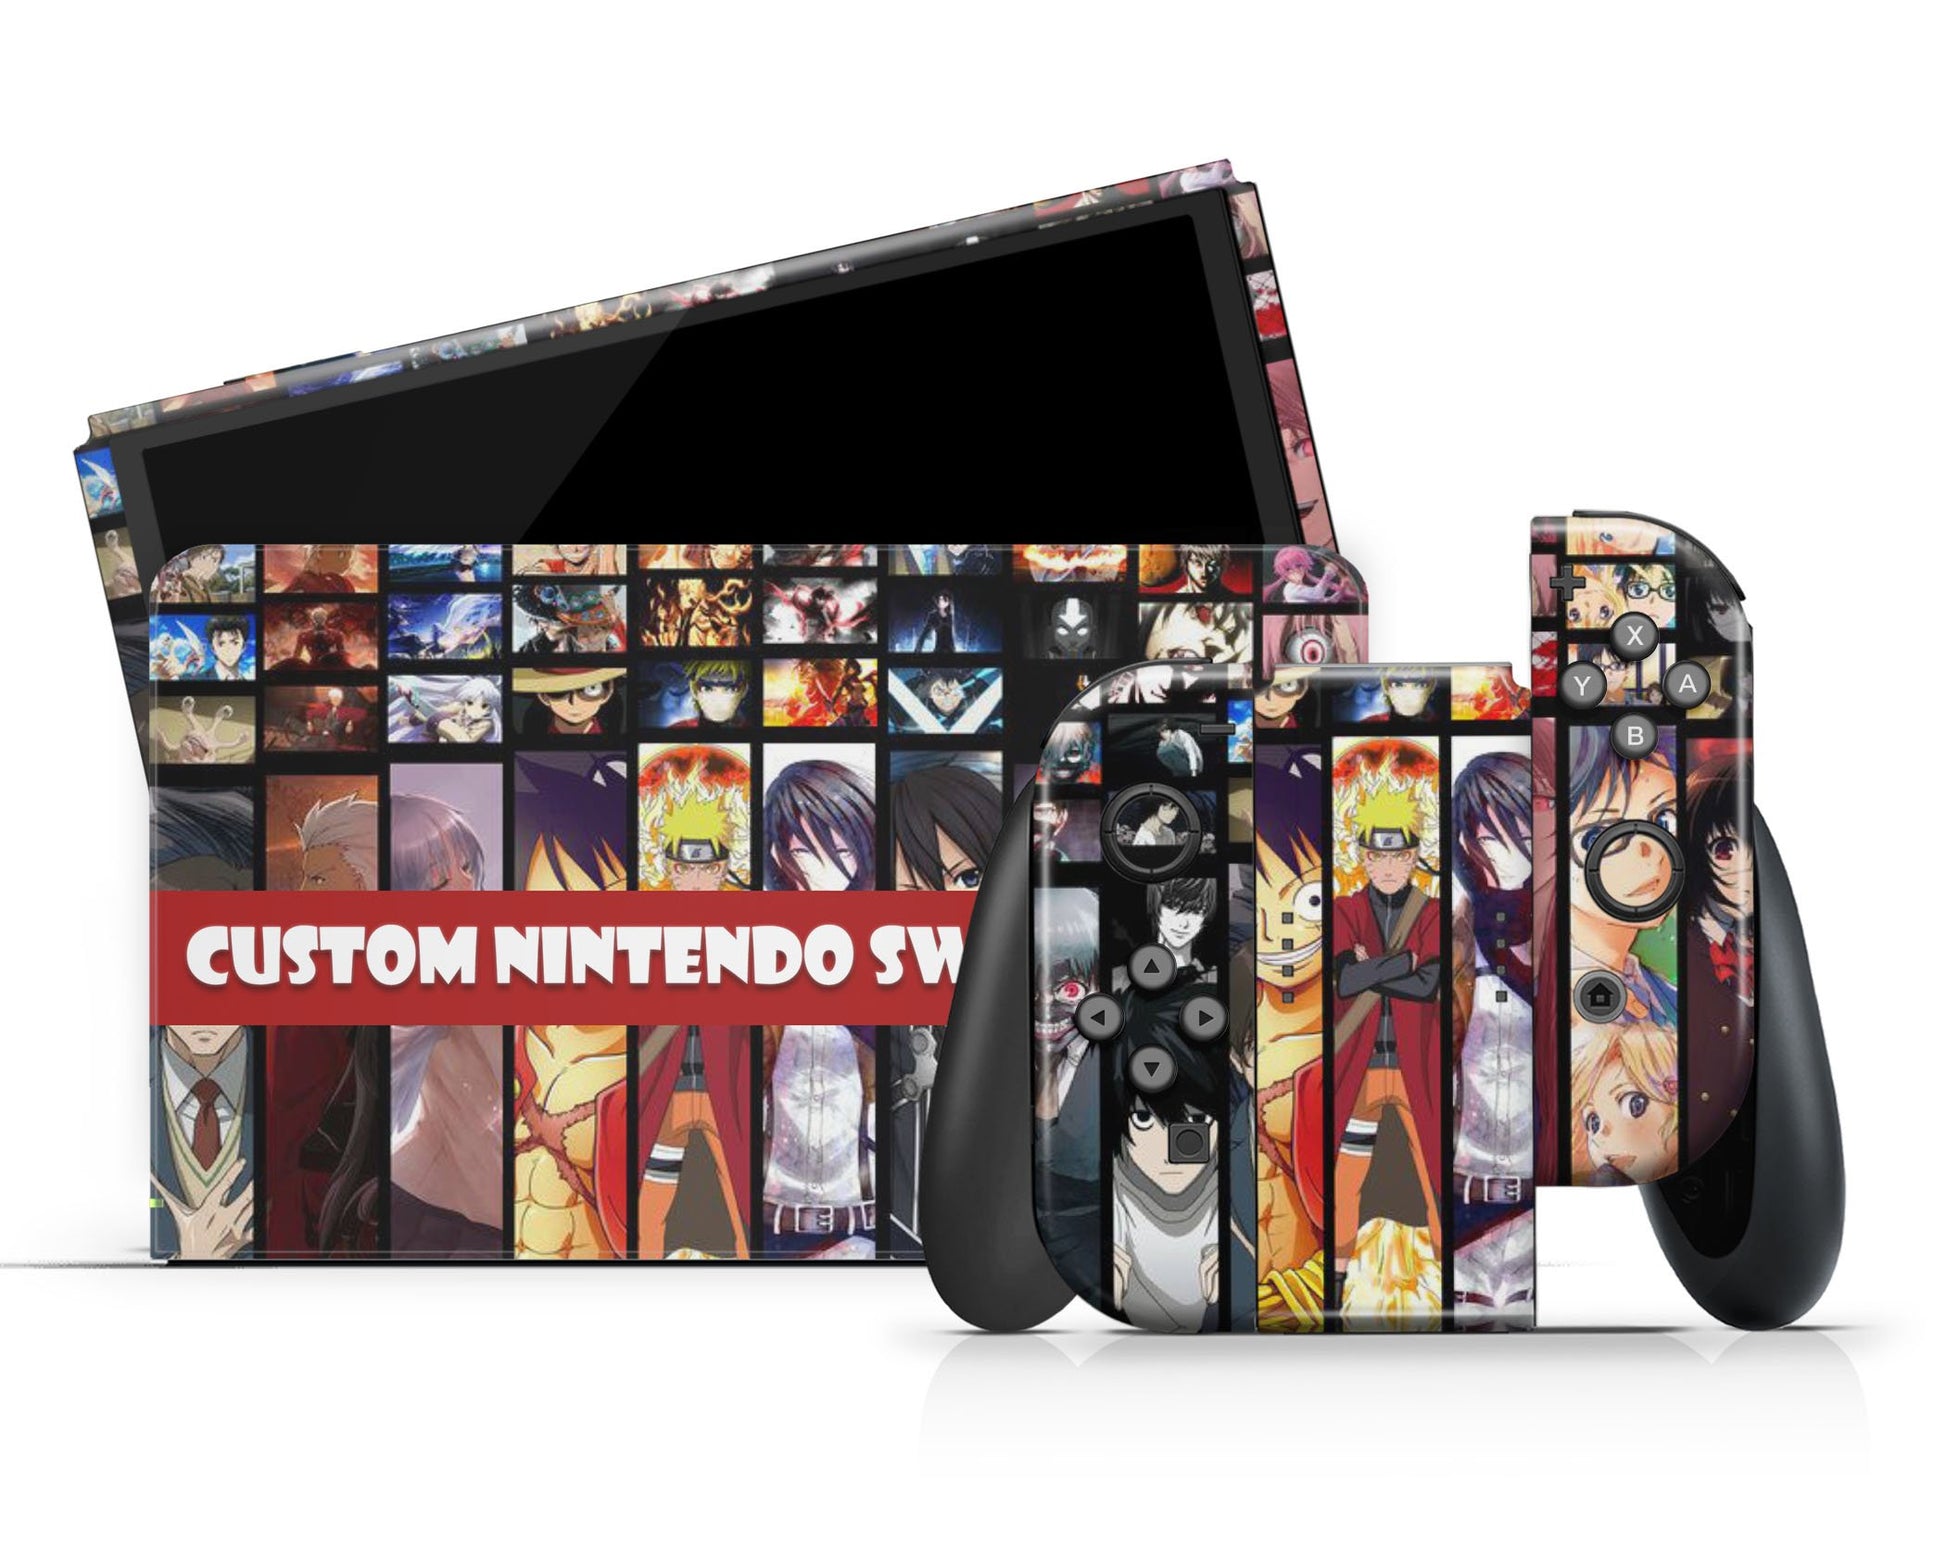 Oled Custom Your Own Nintendo Switch Skin Decal Sticker // Personalise Your Switch  Console 